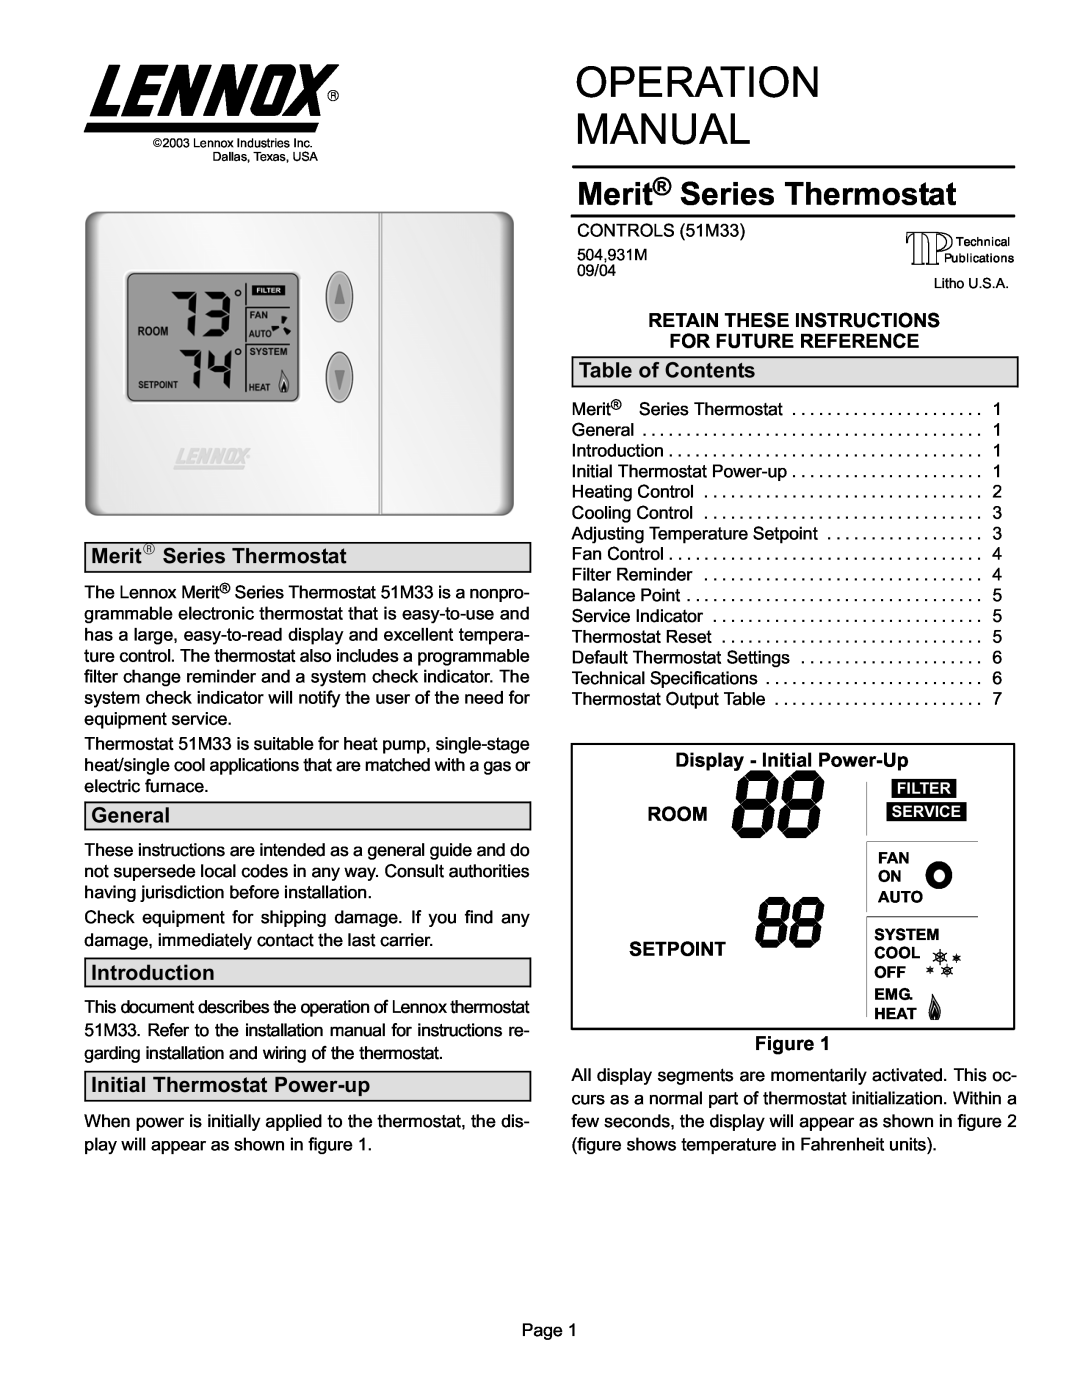 Lennox International Inc 51M32 Merit Series Thermostat, MeritR Series Thermostat, Table of Contents, General, Introduction 